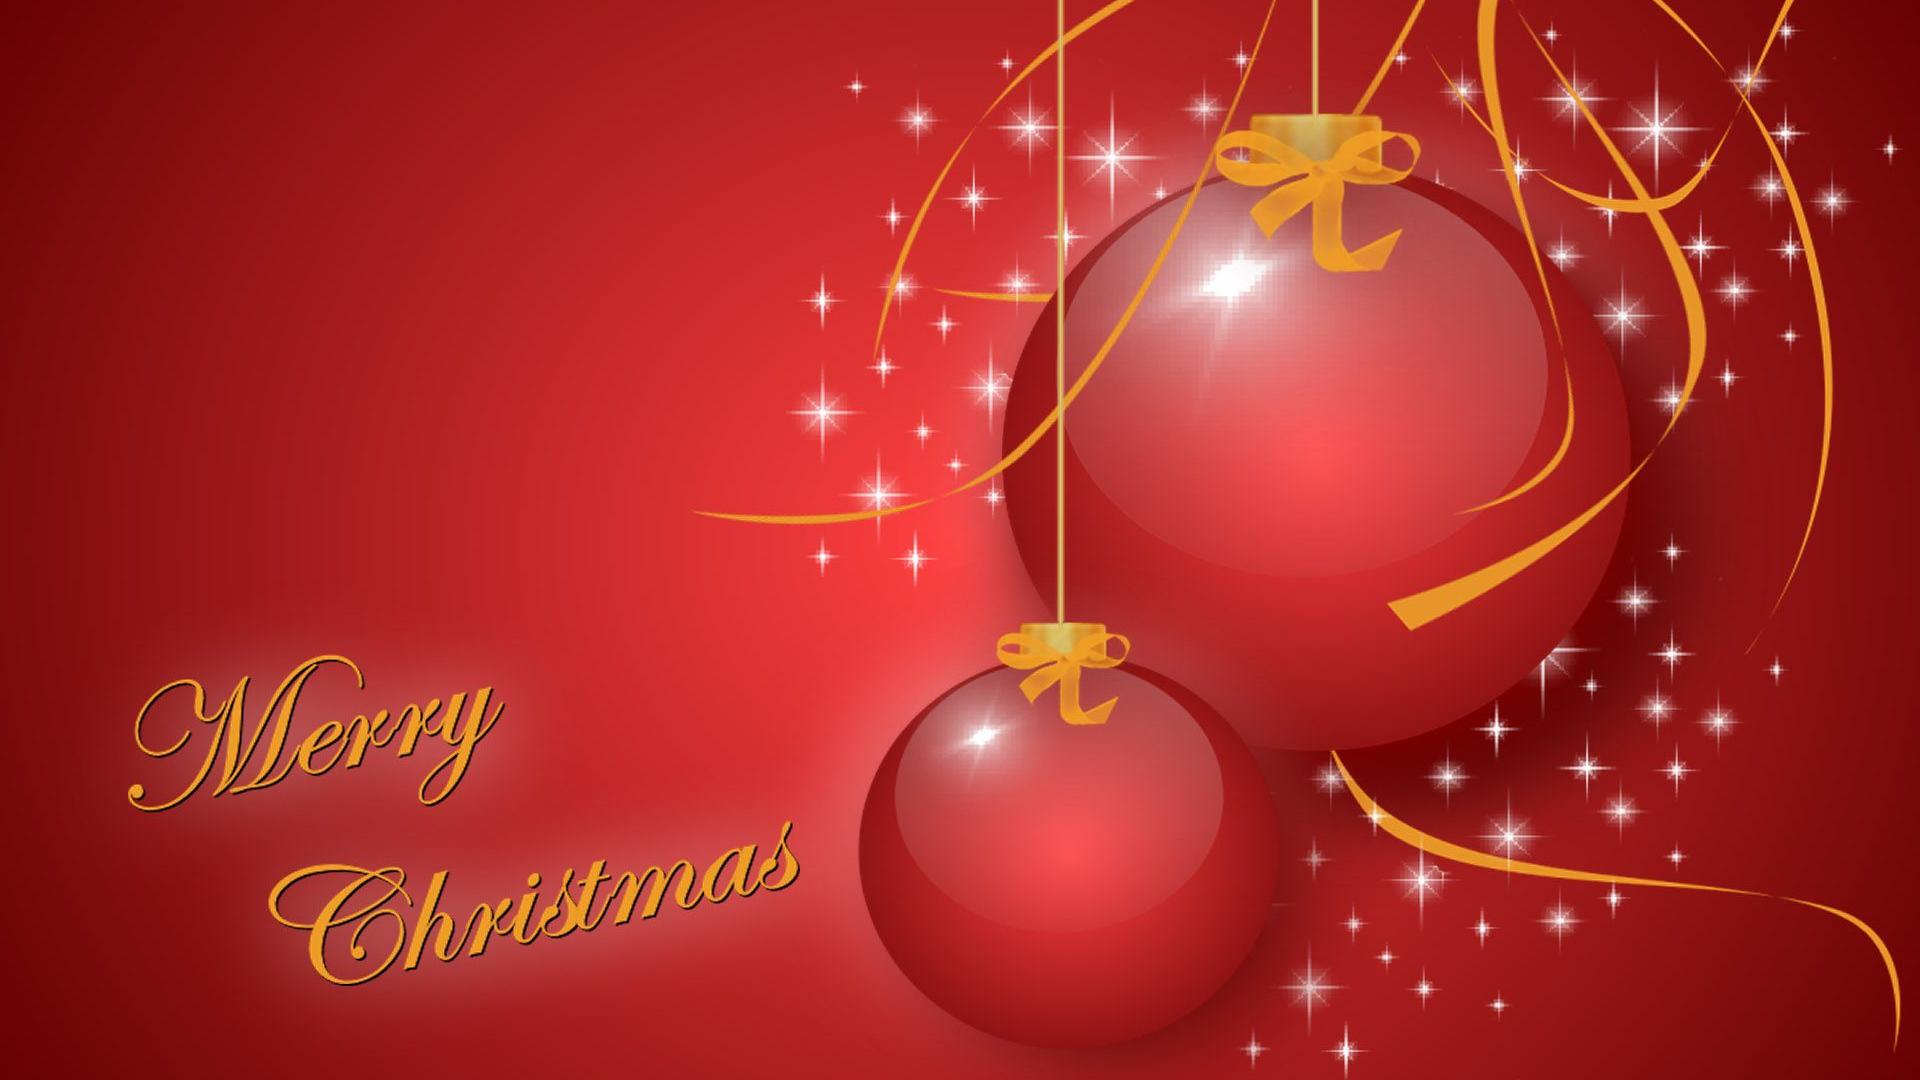 Merry Christmas Card HD Wallpaper Of